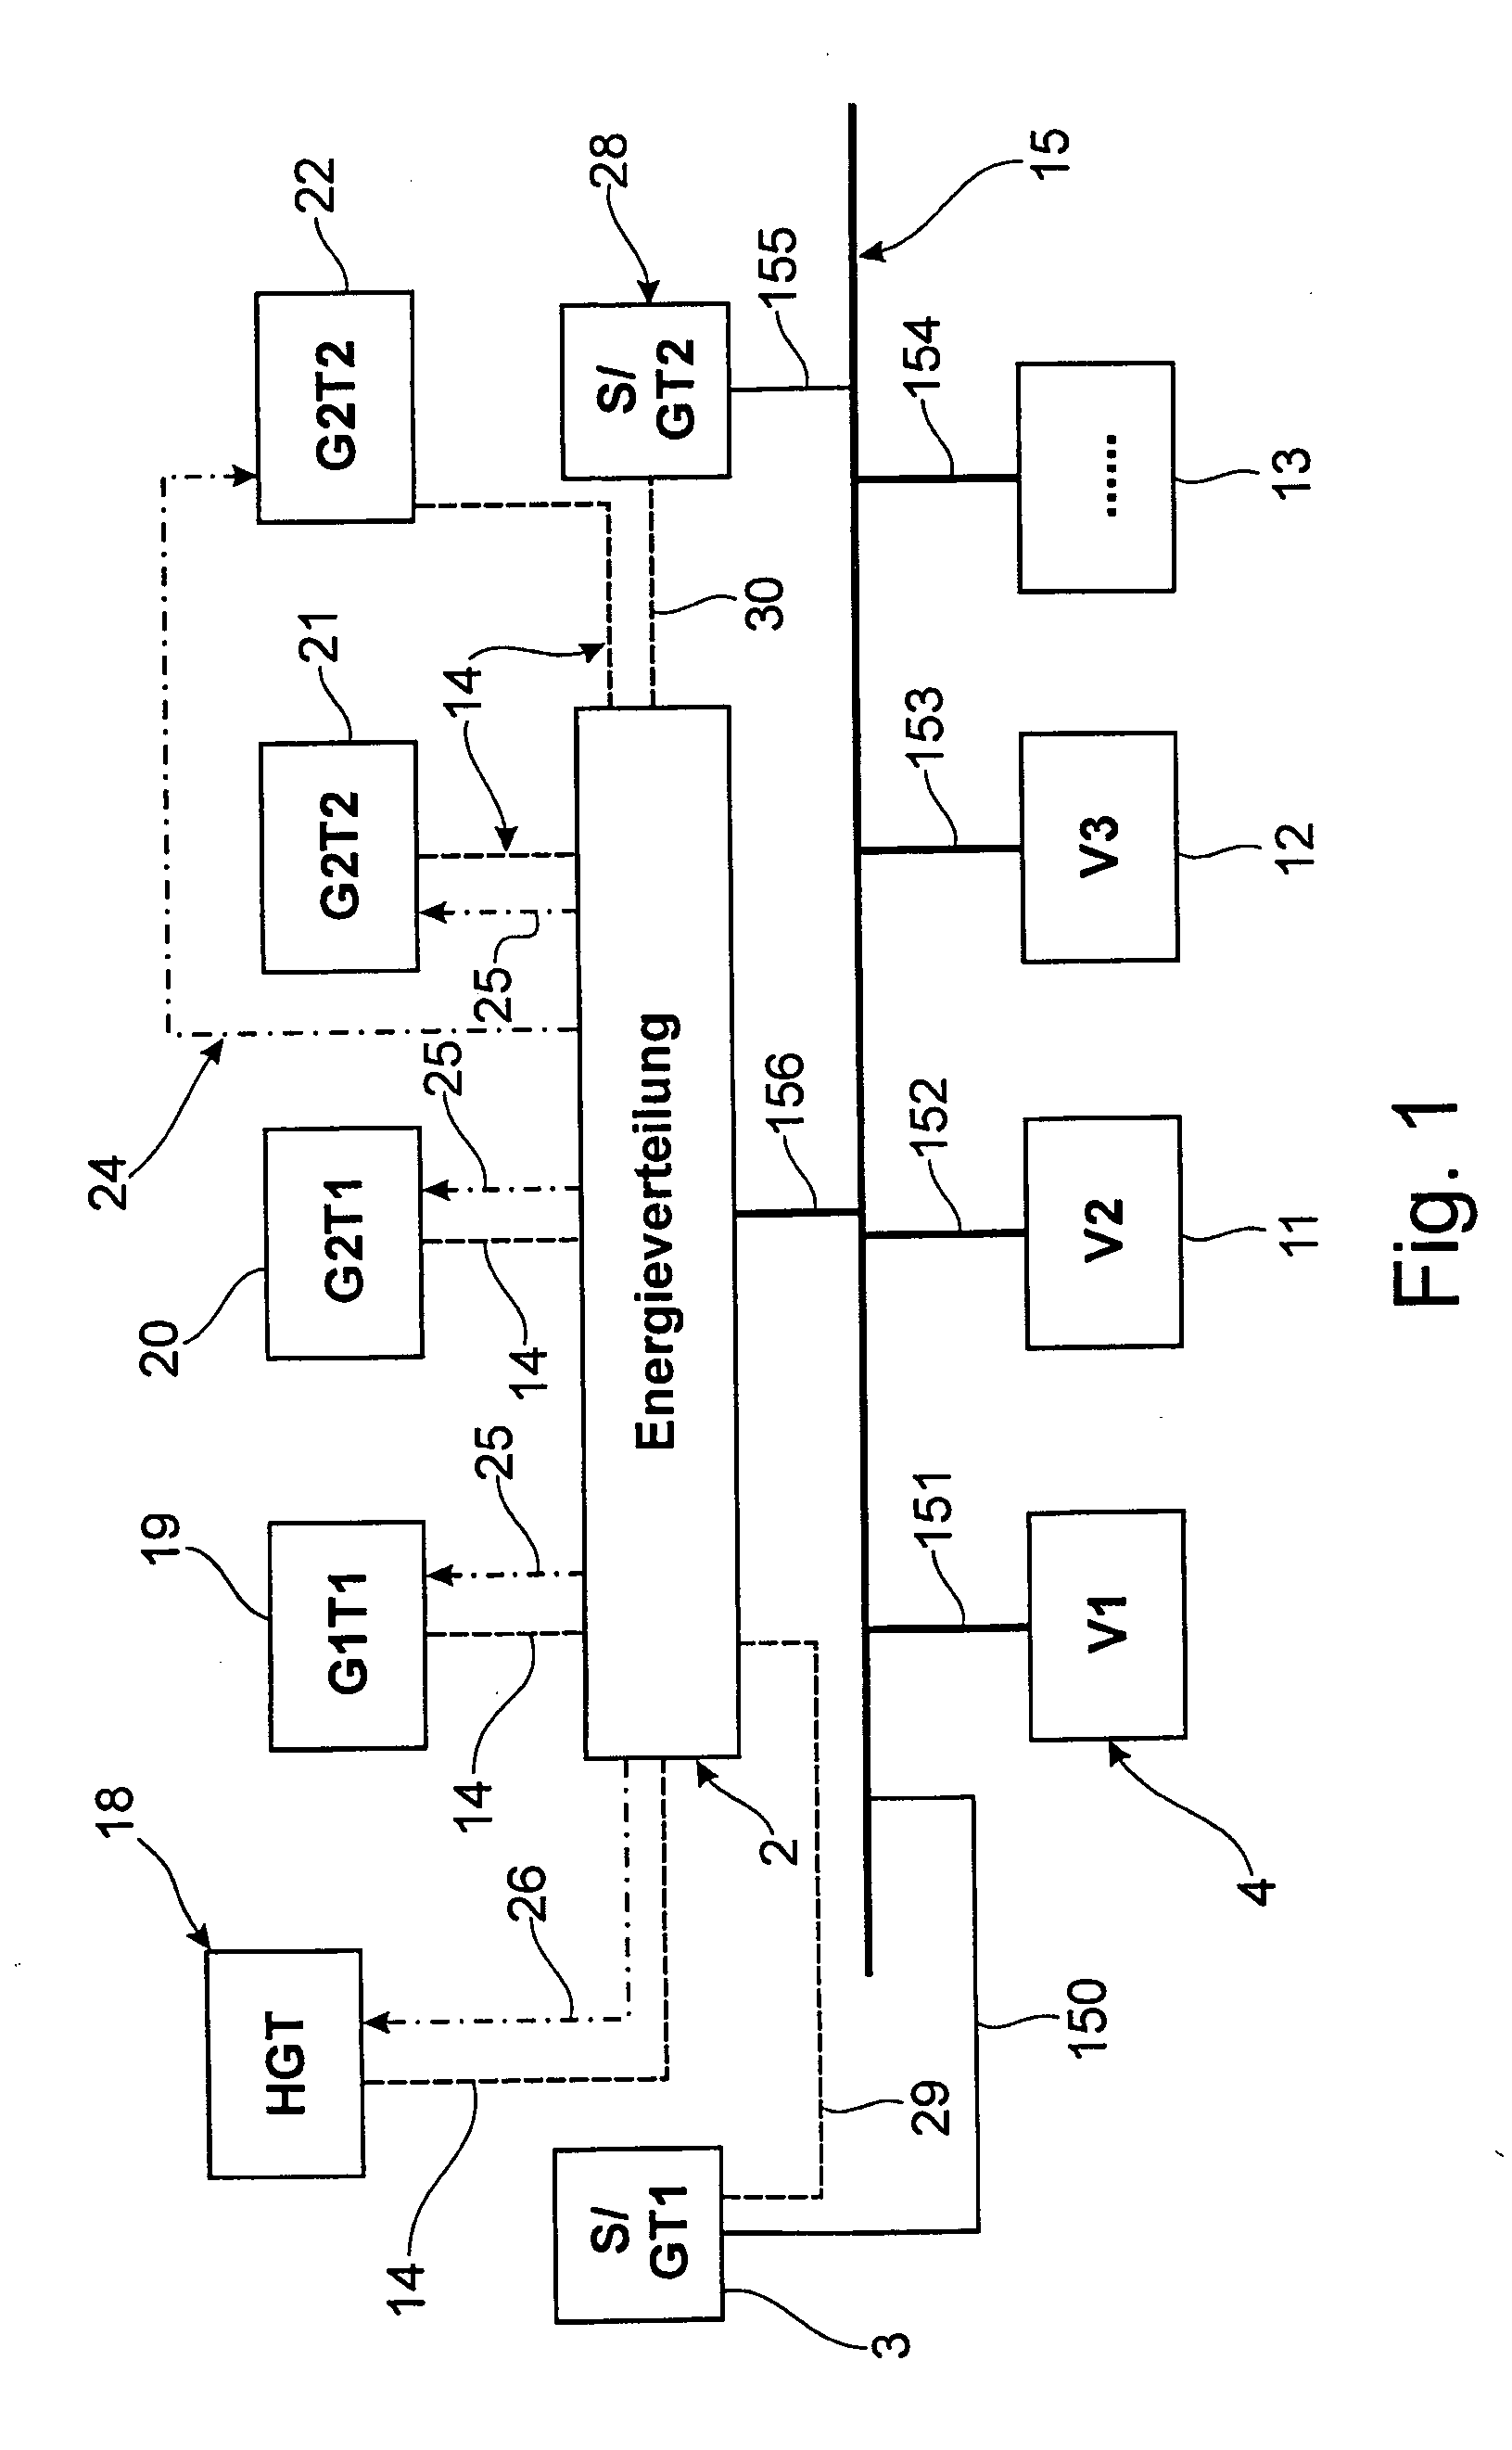 Fuel cell system as a primary electrical energy supply for aircraft